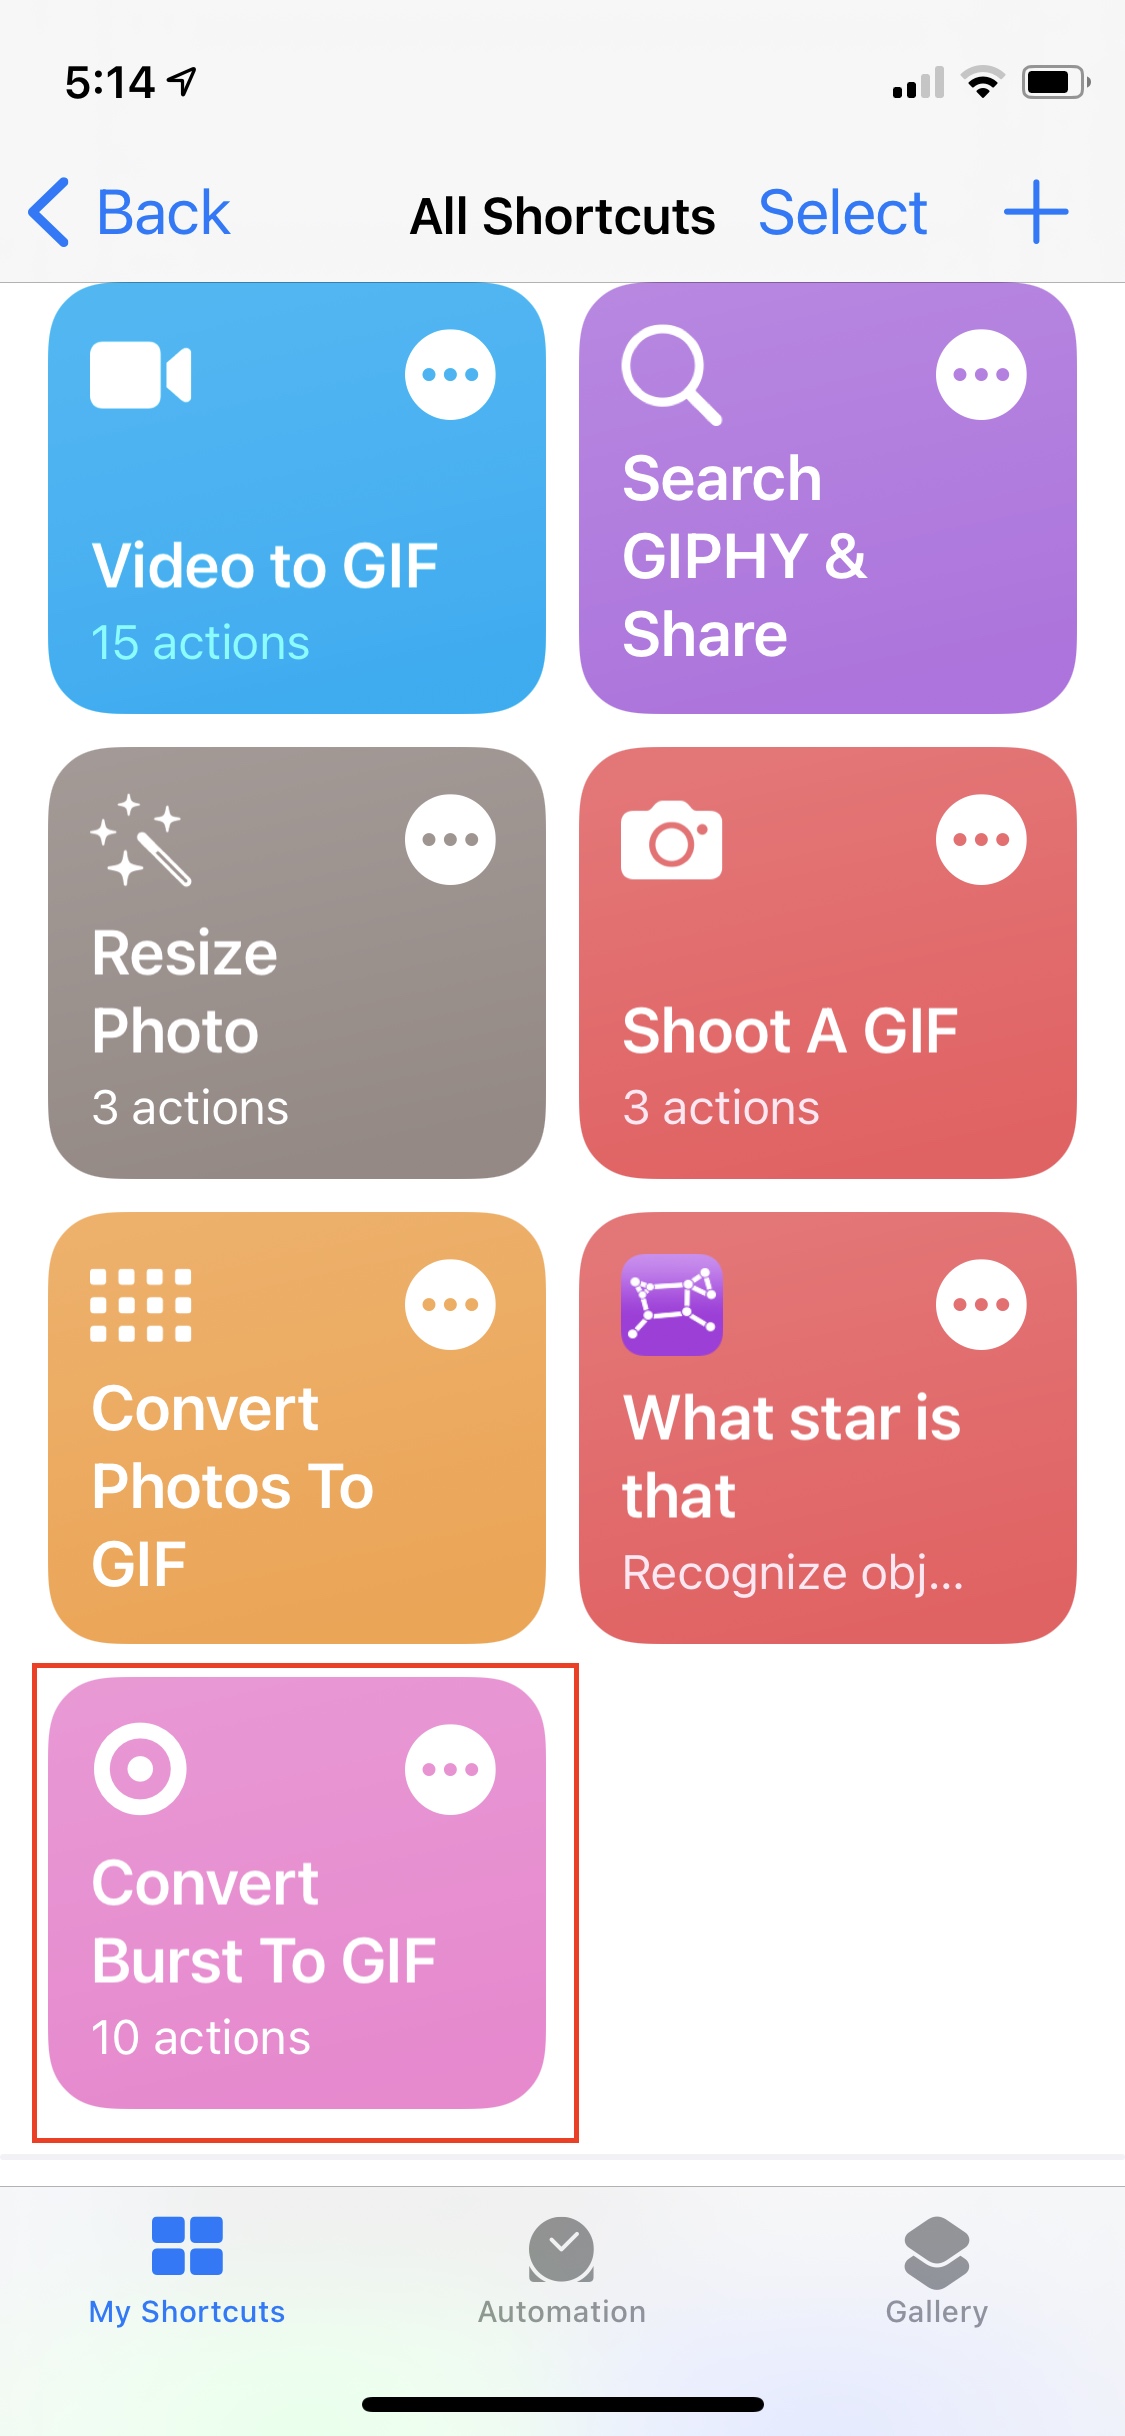 How to Make a GIF From Your iPhone Videos Using Shortcuts